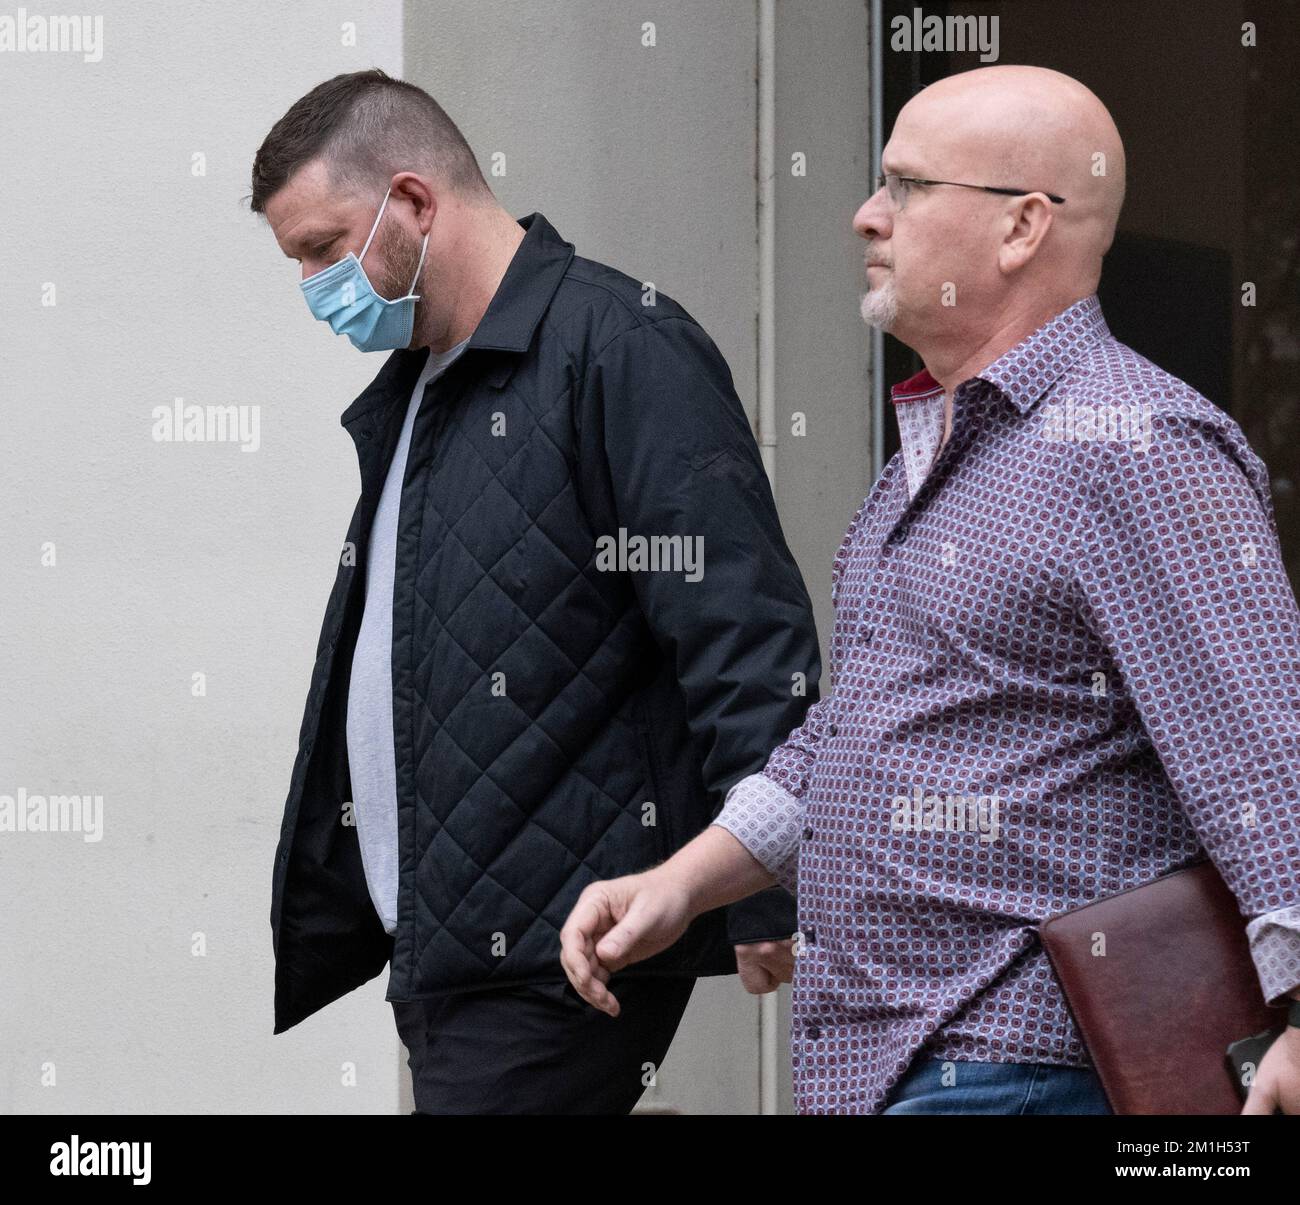 University of Texas men's basketball coach CHRIS BEARD (l) leaves the Travis County jail with attorney PERRY MINTON (r) after an 11-hour lockup for an overnight domestic violence incident in Austin. Texas, ranked #6 in the country, faces Rice tonight, December 12, 2022. Credit: Bob Daemmrich/Alamy Live News Stock Photo